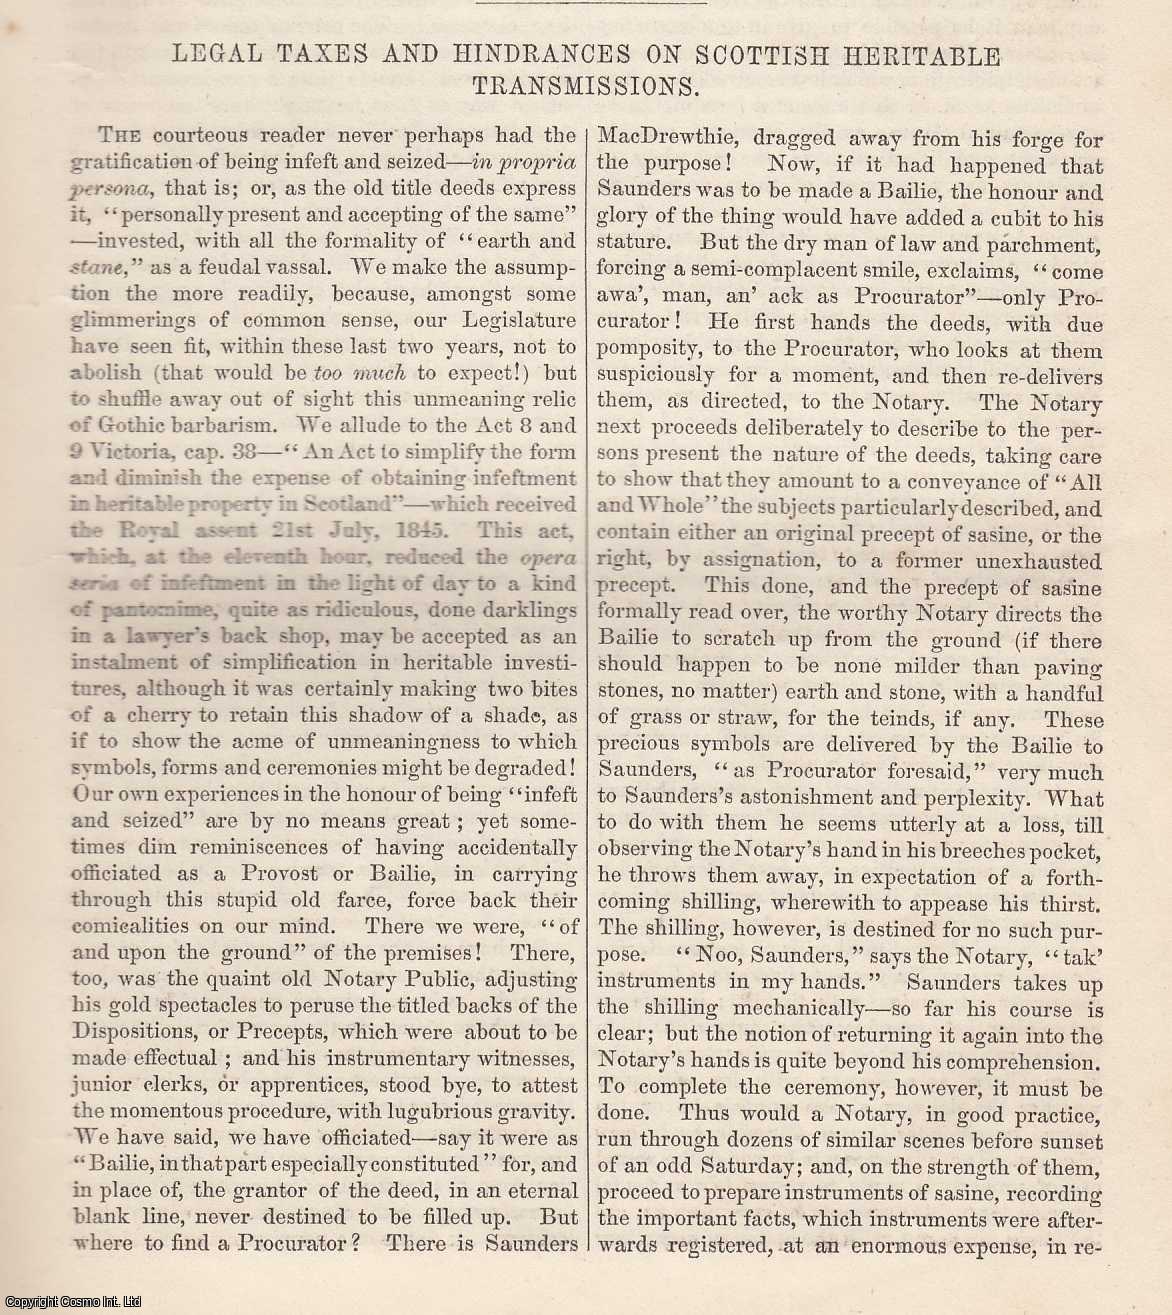 --- - Legal Taxes and Hindrances of Scottish Heritable Transmissions. An original article from Tait's Edinburgh Magazine, 1847.